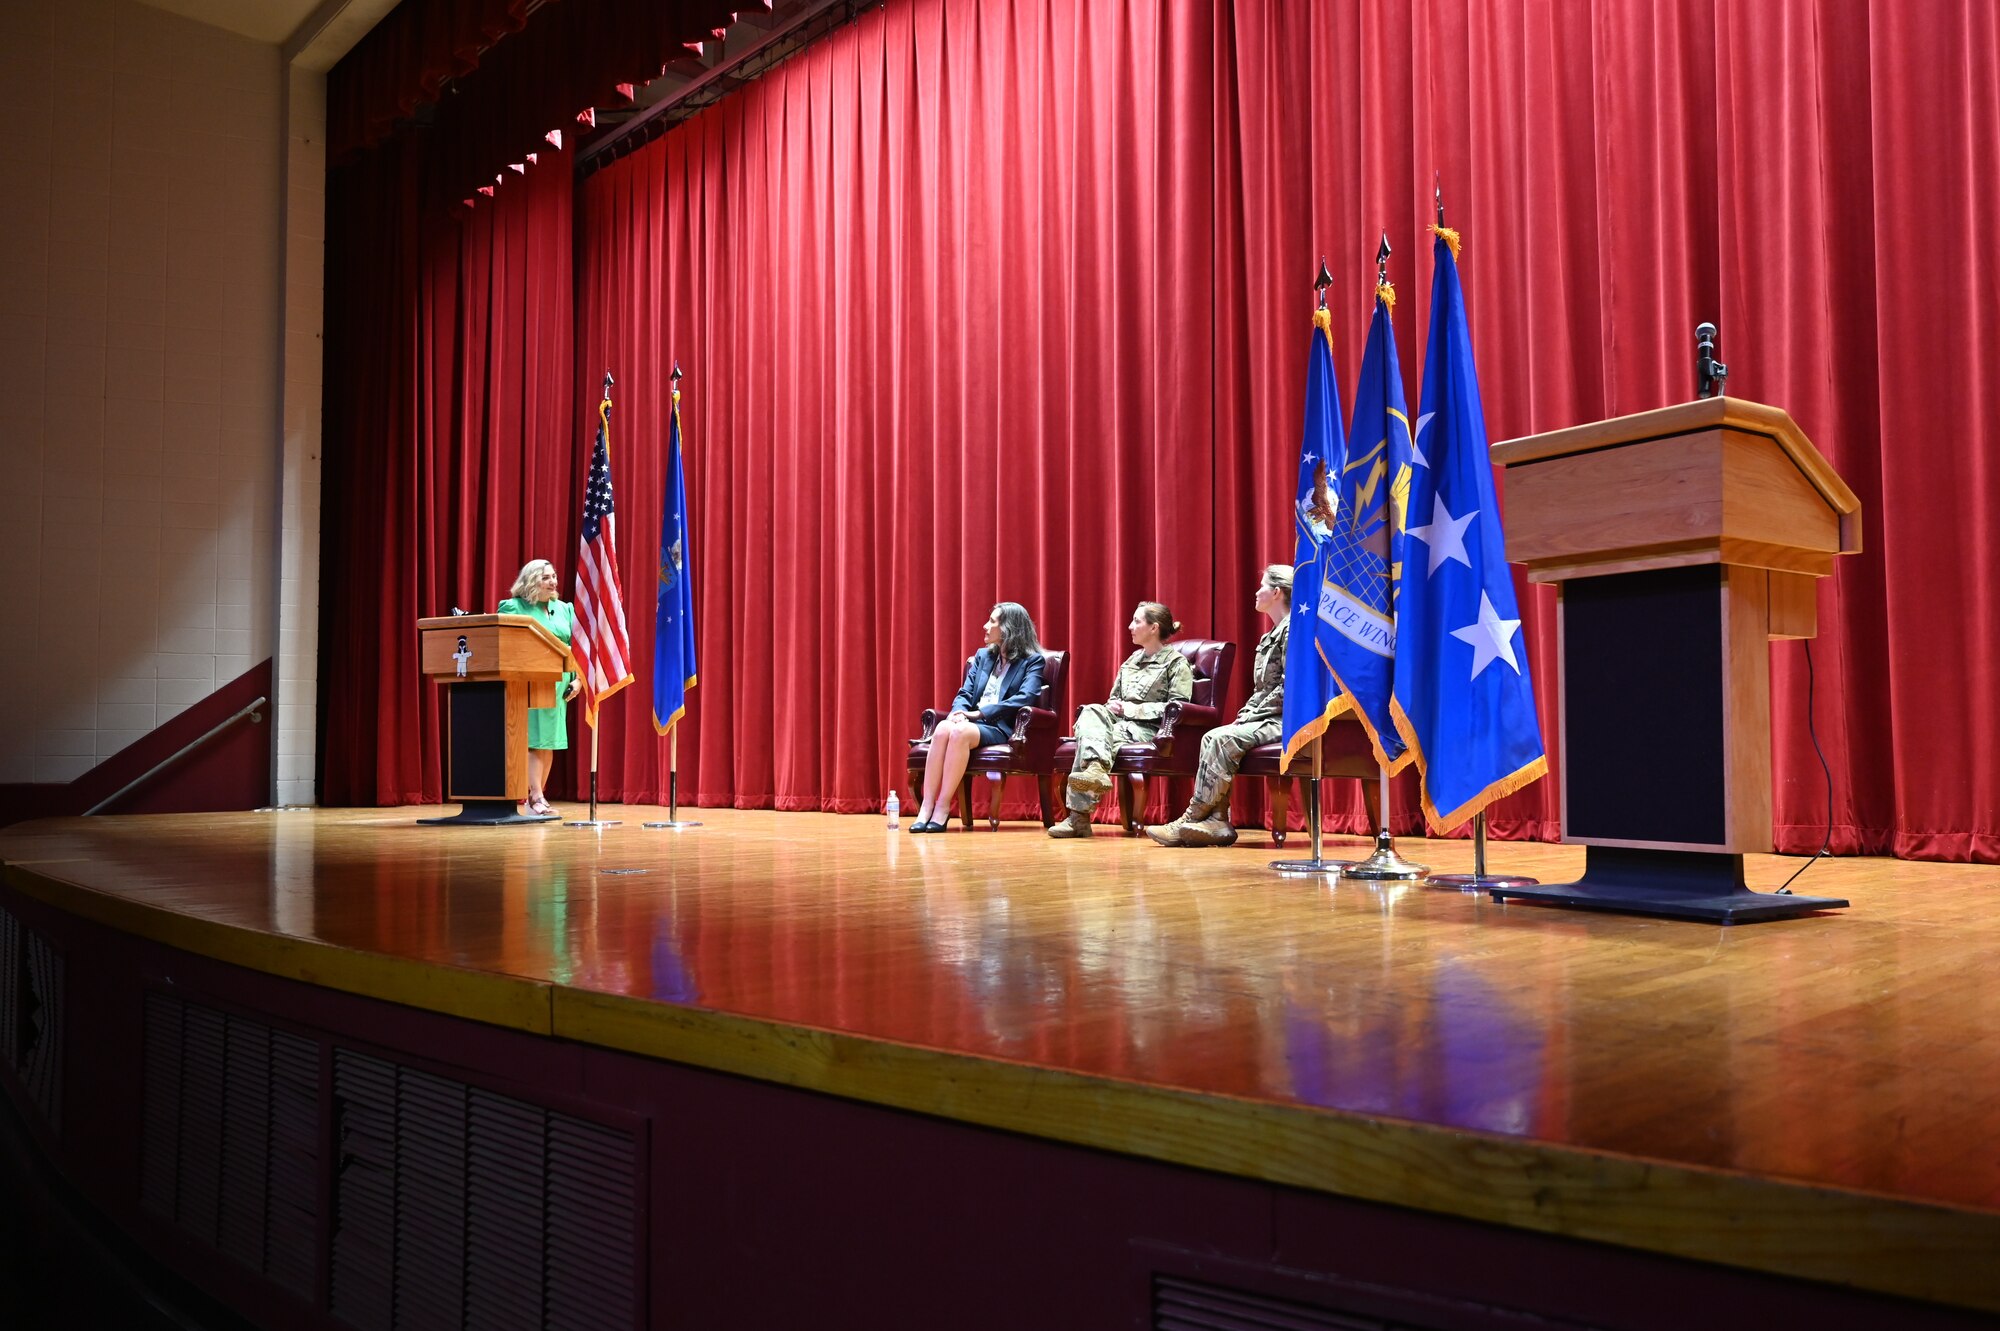 Frances Martinez, 960th Cyberspace Wing director of psychological health, introduces a panel of mental health experts May 14, 2022 at the Bob Hope Performing Arts Center at Joint Base San Antonio-Lackland, Texas.